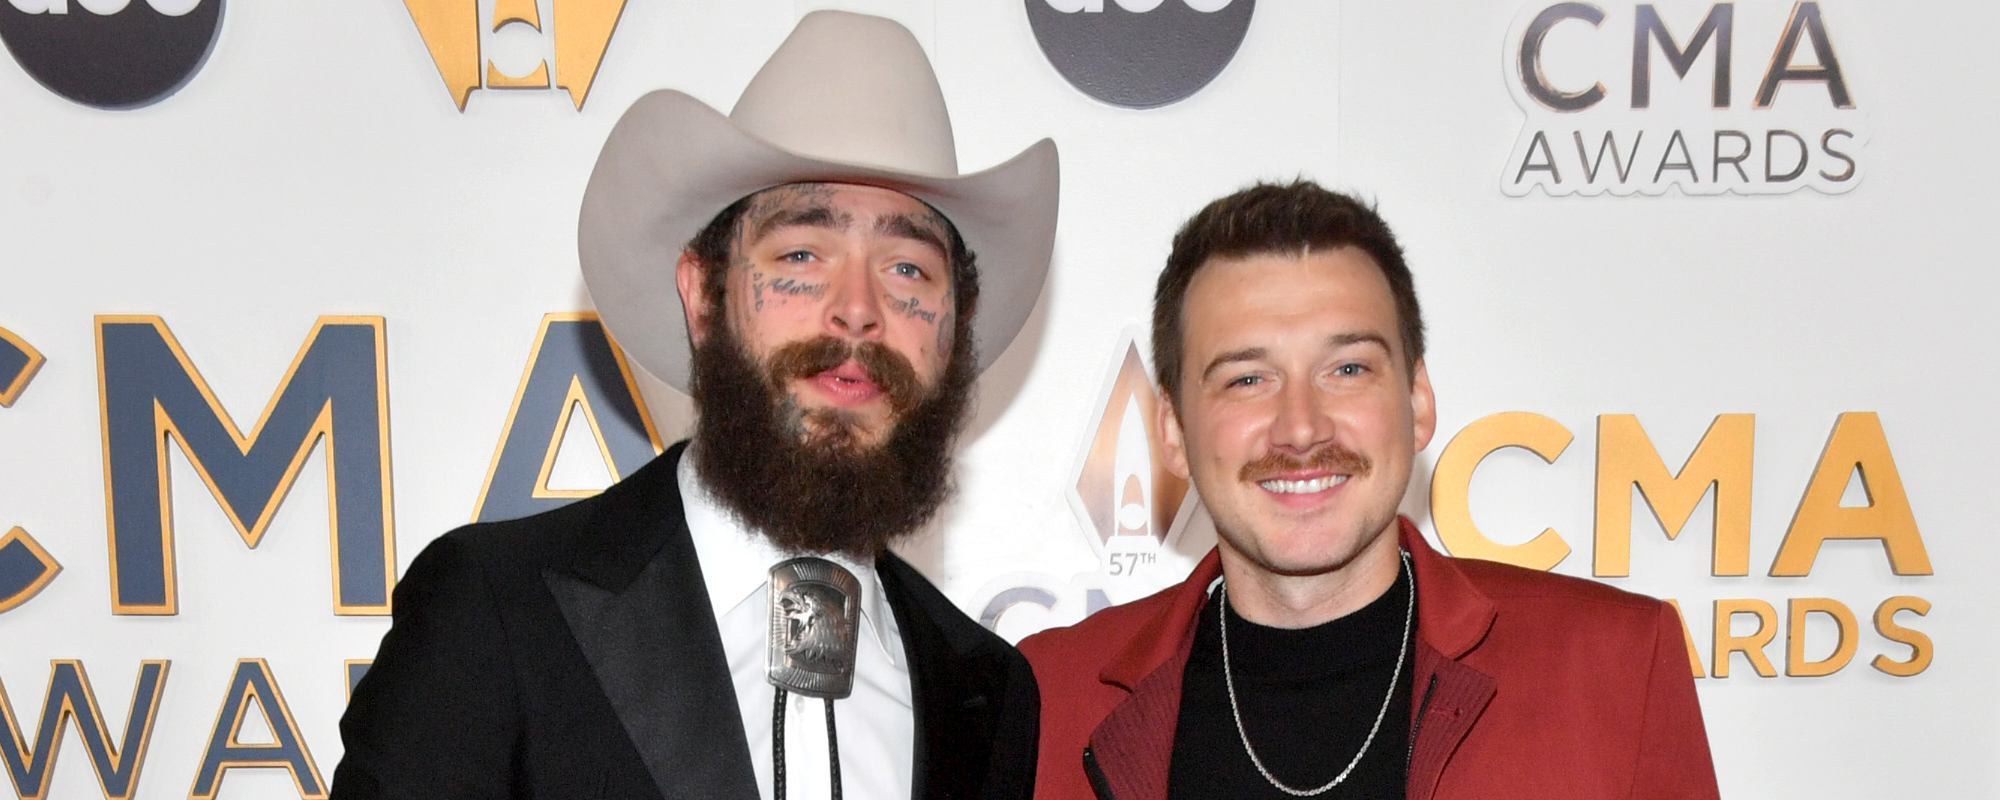 Post Malone “About To Break Every Record for a Country Single There Is” as Morgan Wallen Collab Heads to Country Radio